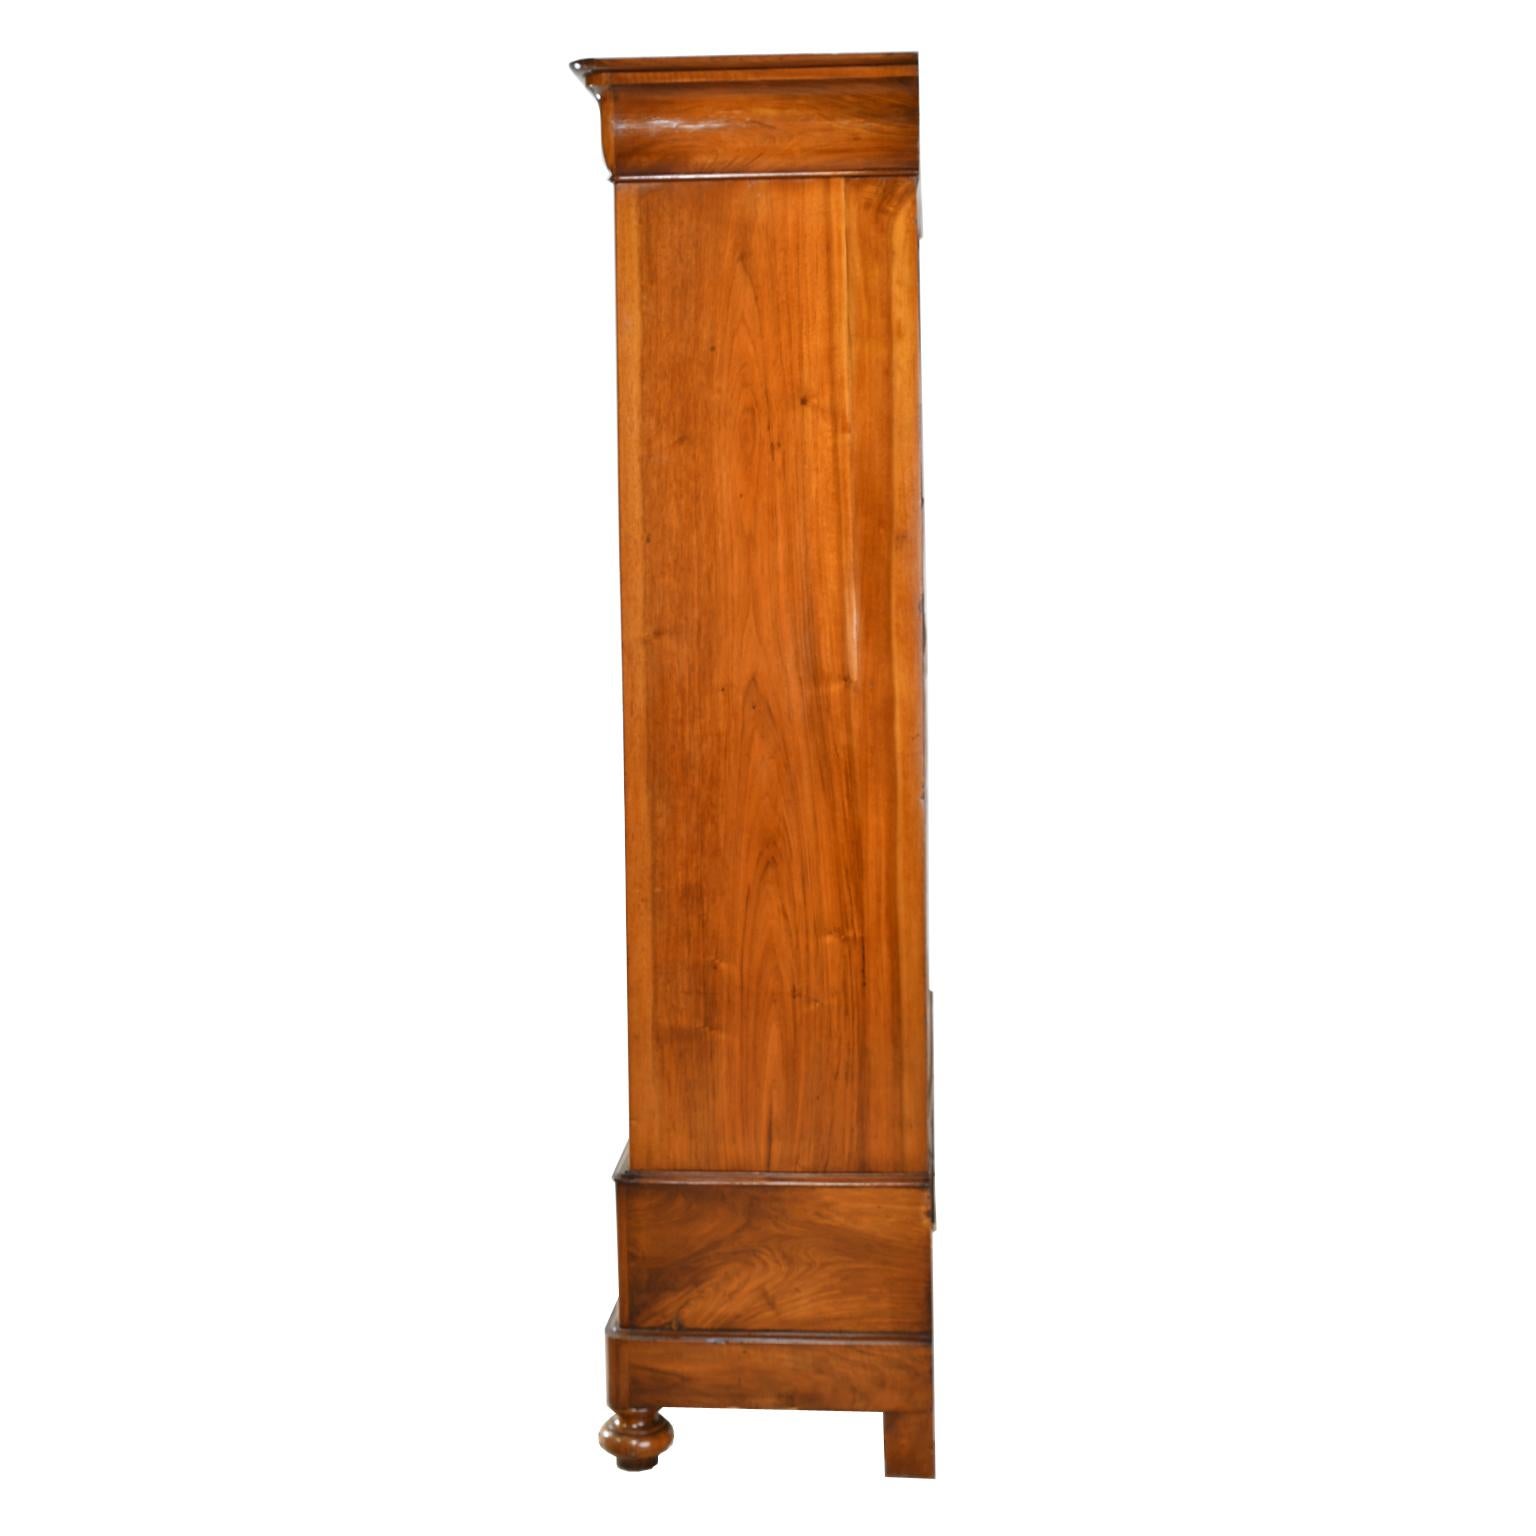 Polished Tall and Narrow French Louis Philippe Armoire with Mirrored Door, circa 1830